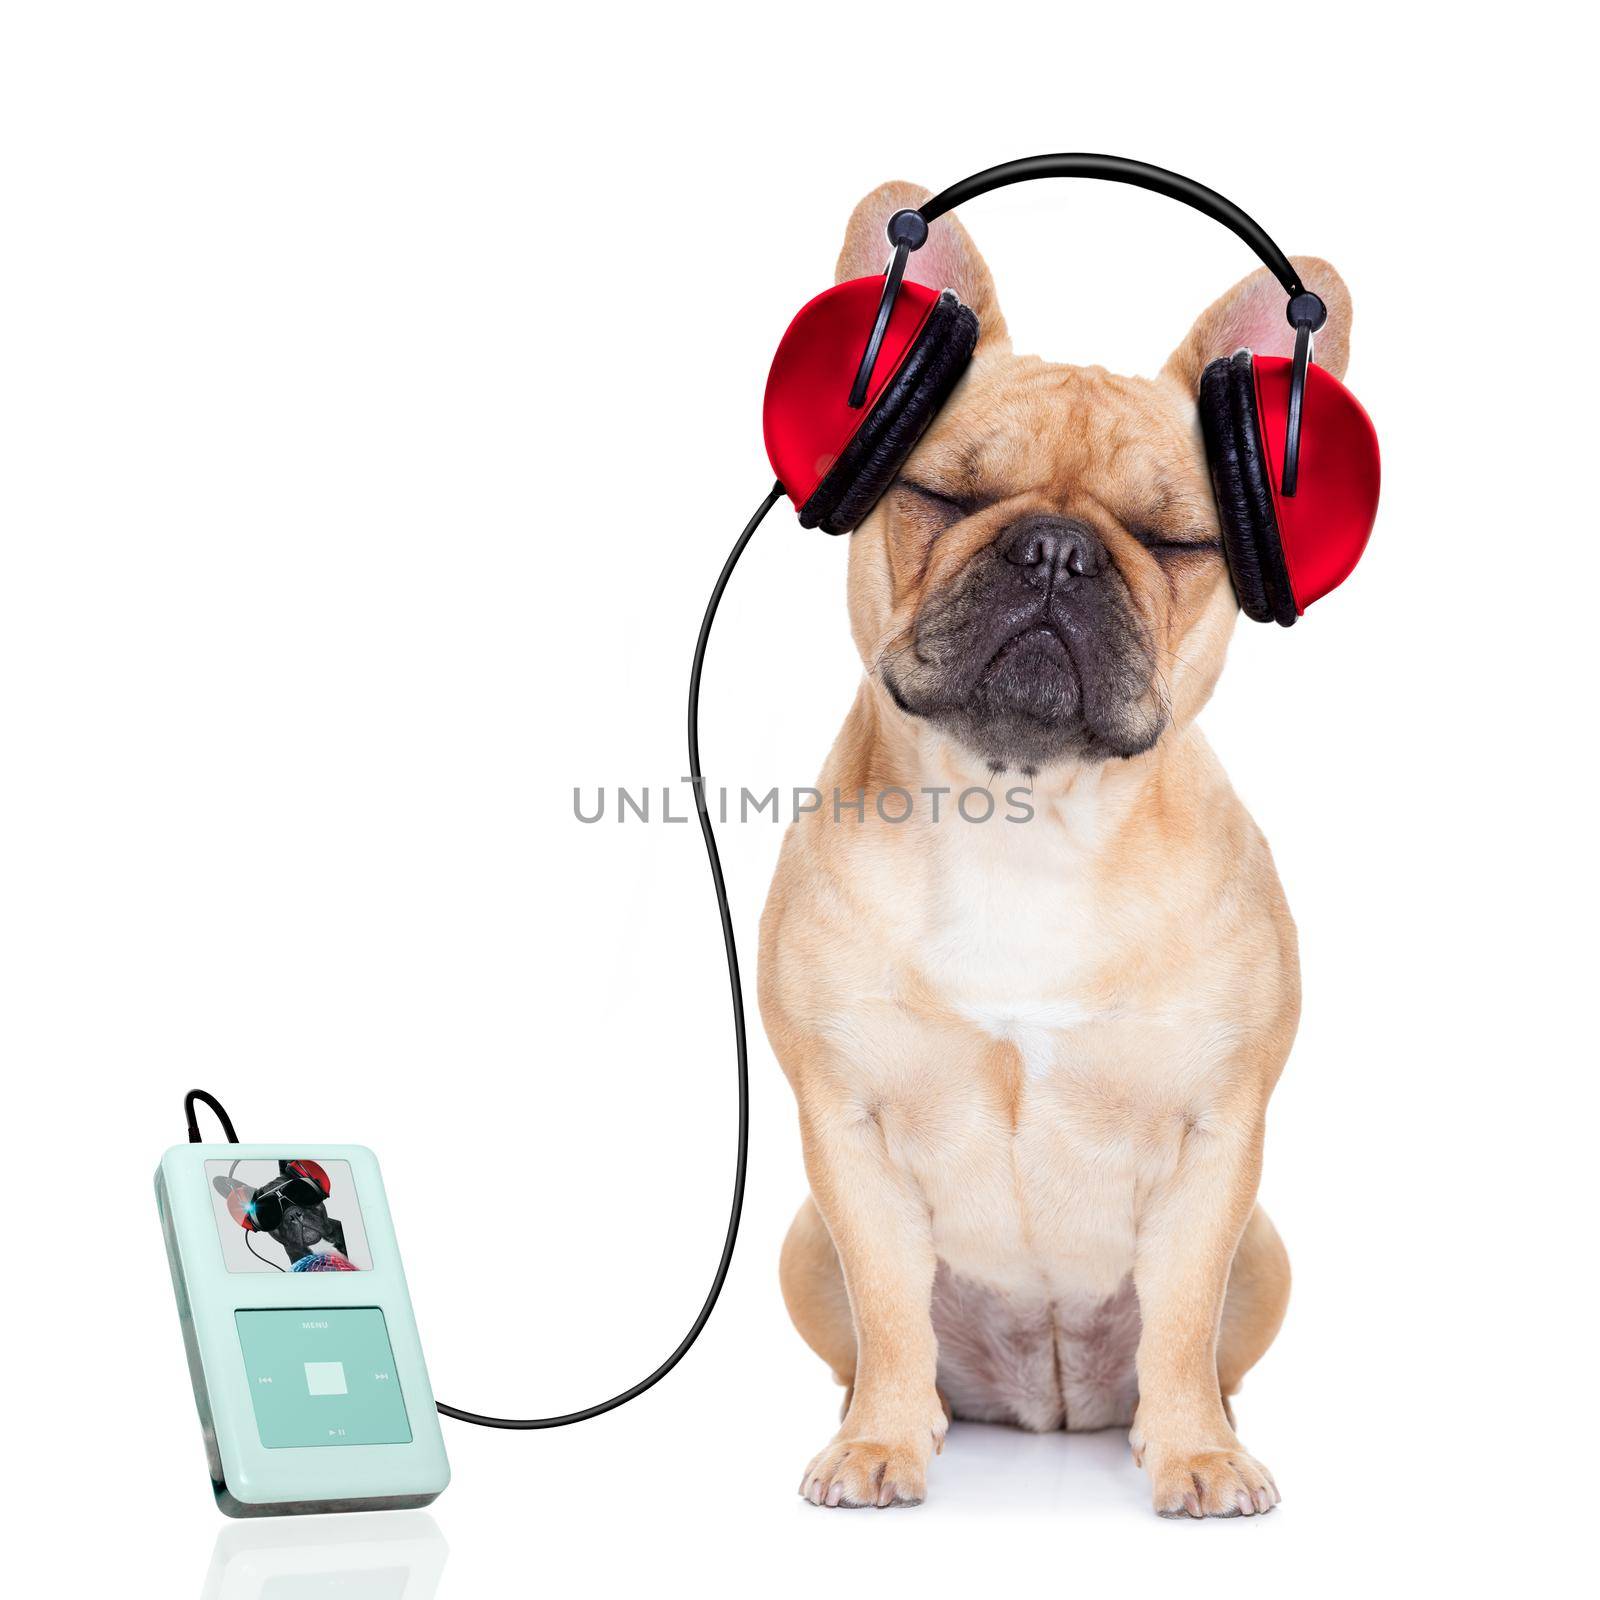 french bulldog dog listening music, while relaxing and enjoying the sound , isolated on white background